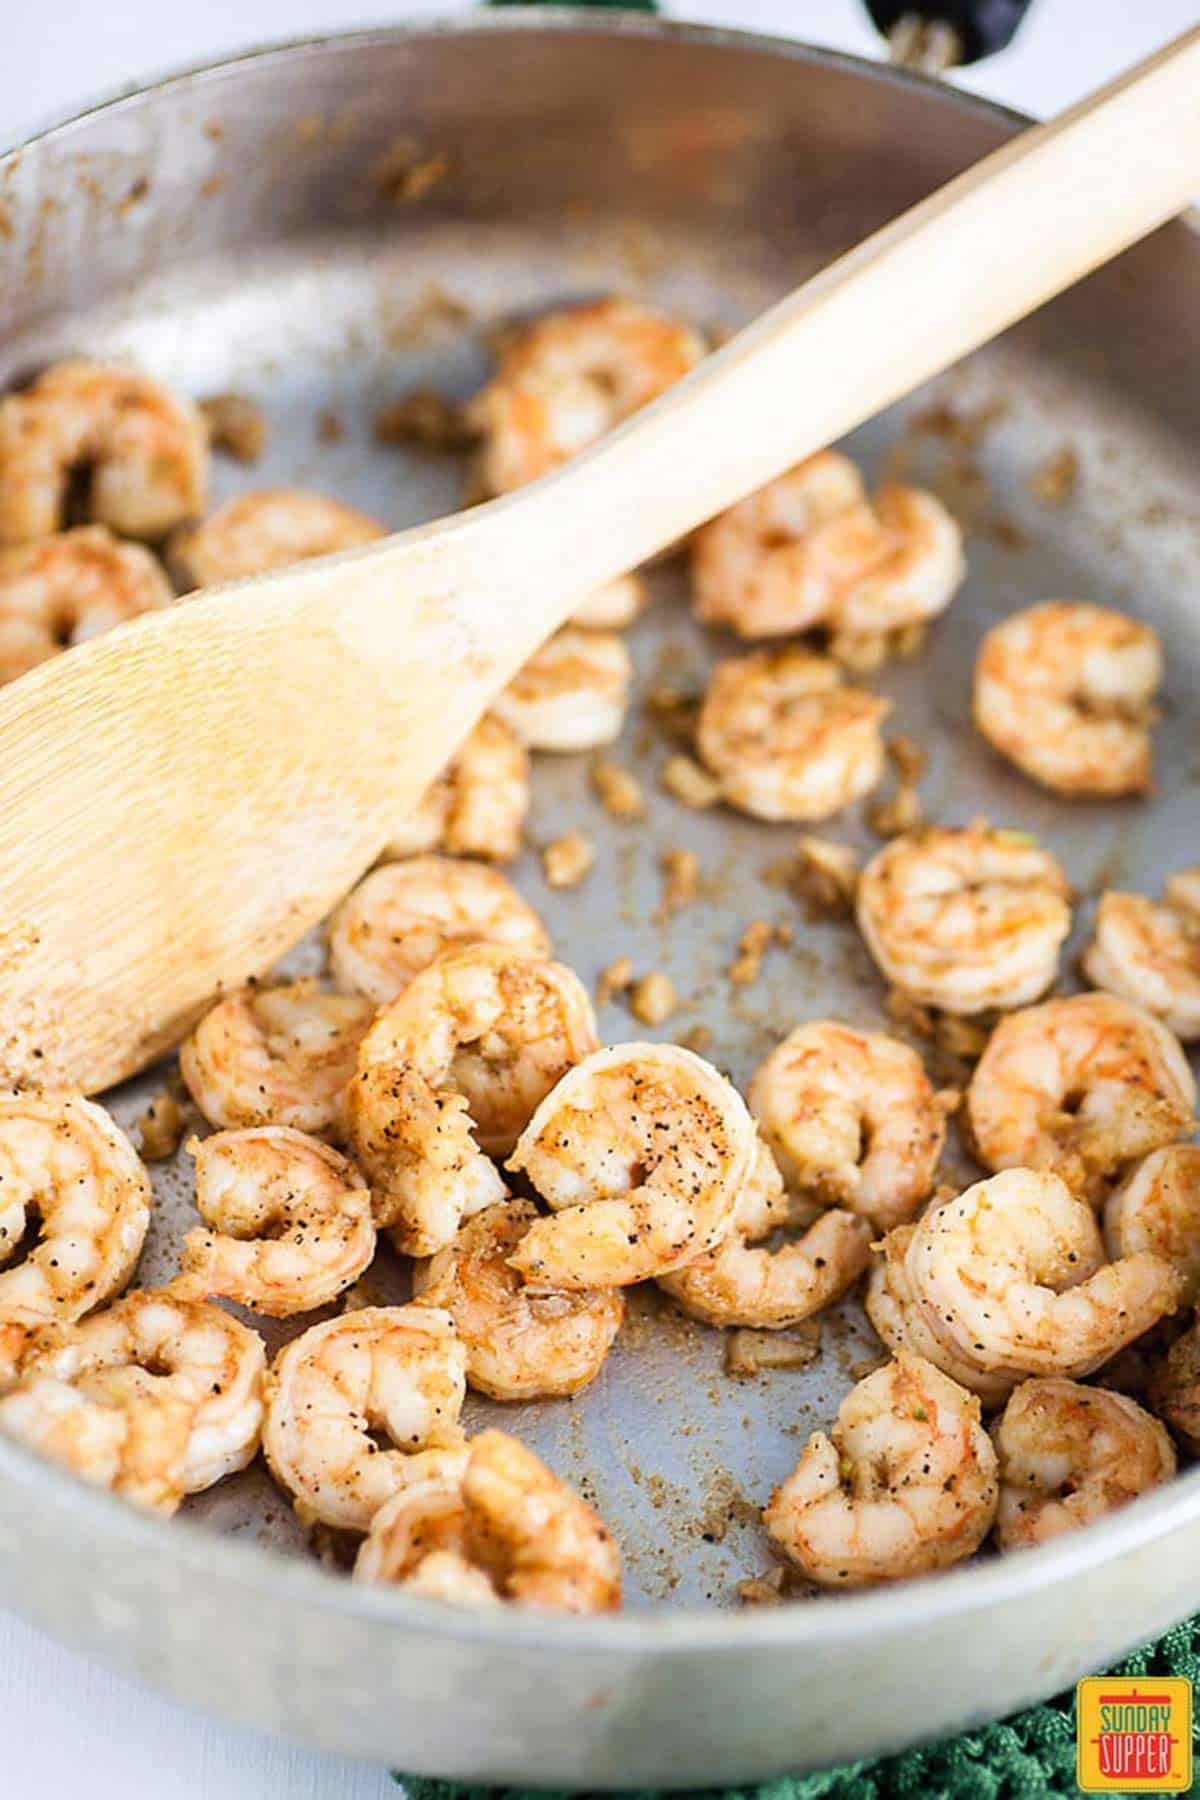 Shrimp sauteeing in a pan